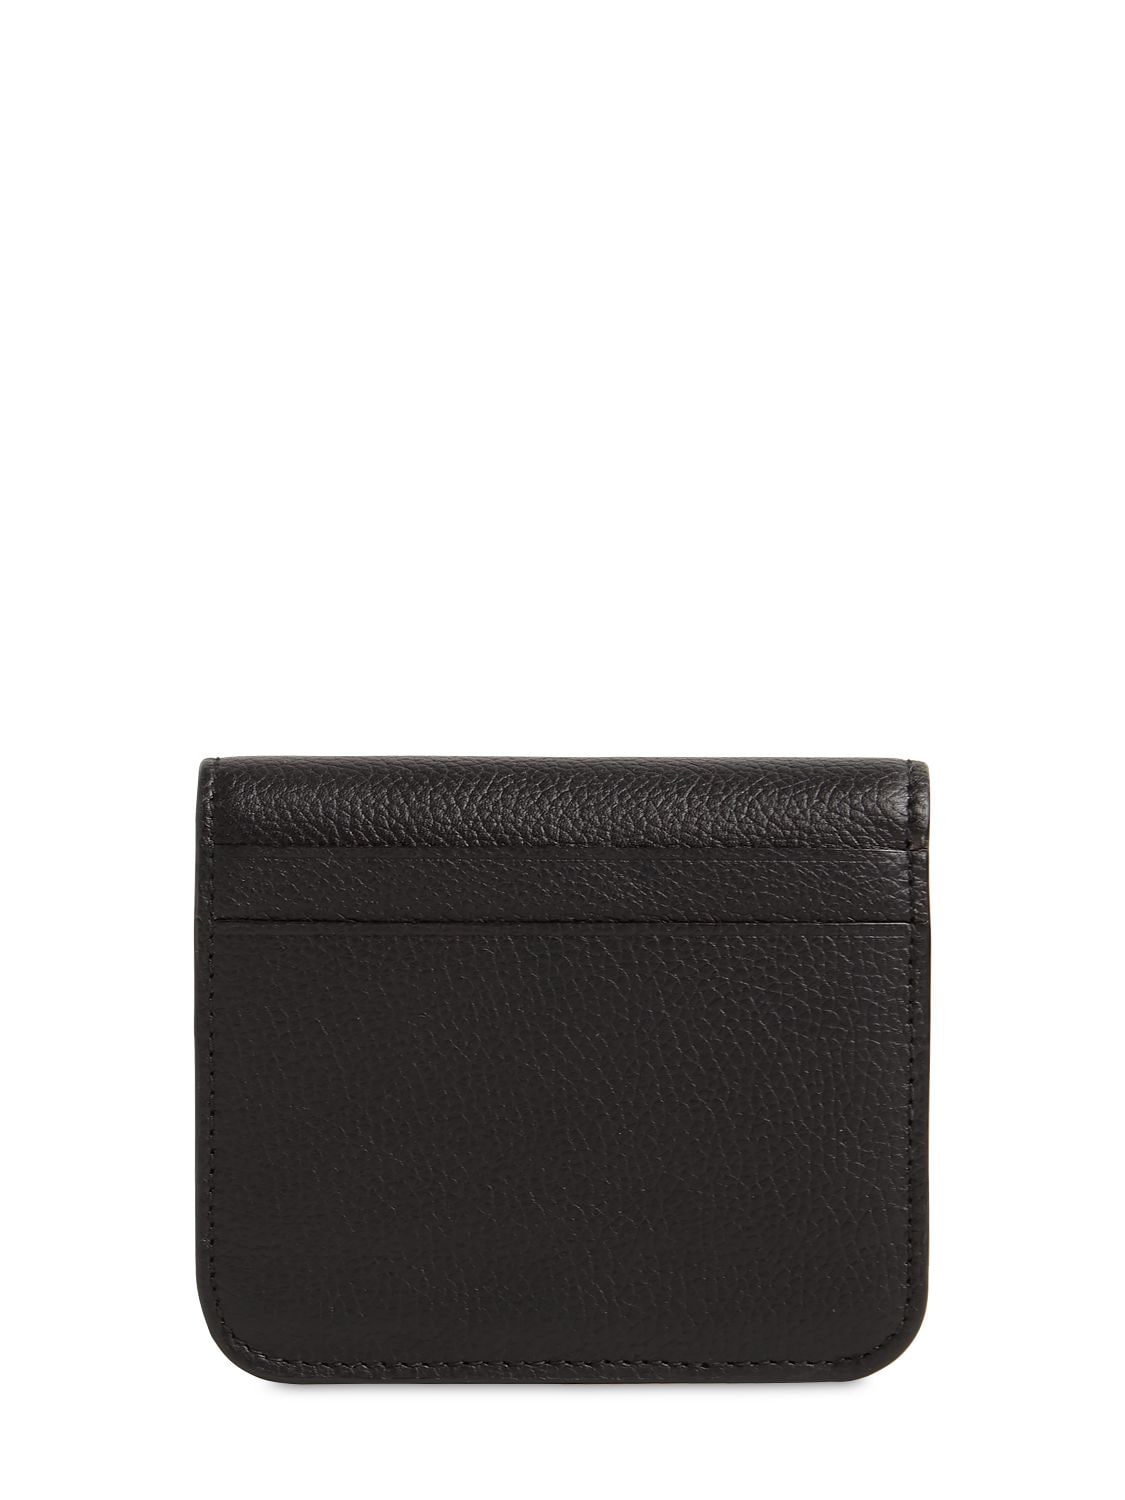 Shop Balenciaga Grained Leather Compact Wallet In Black